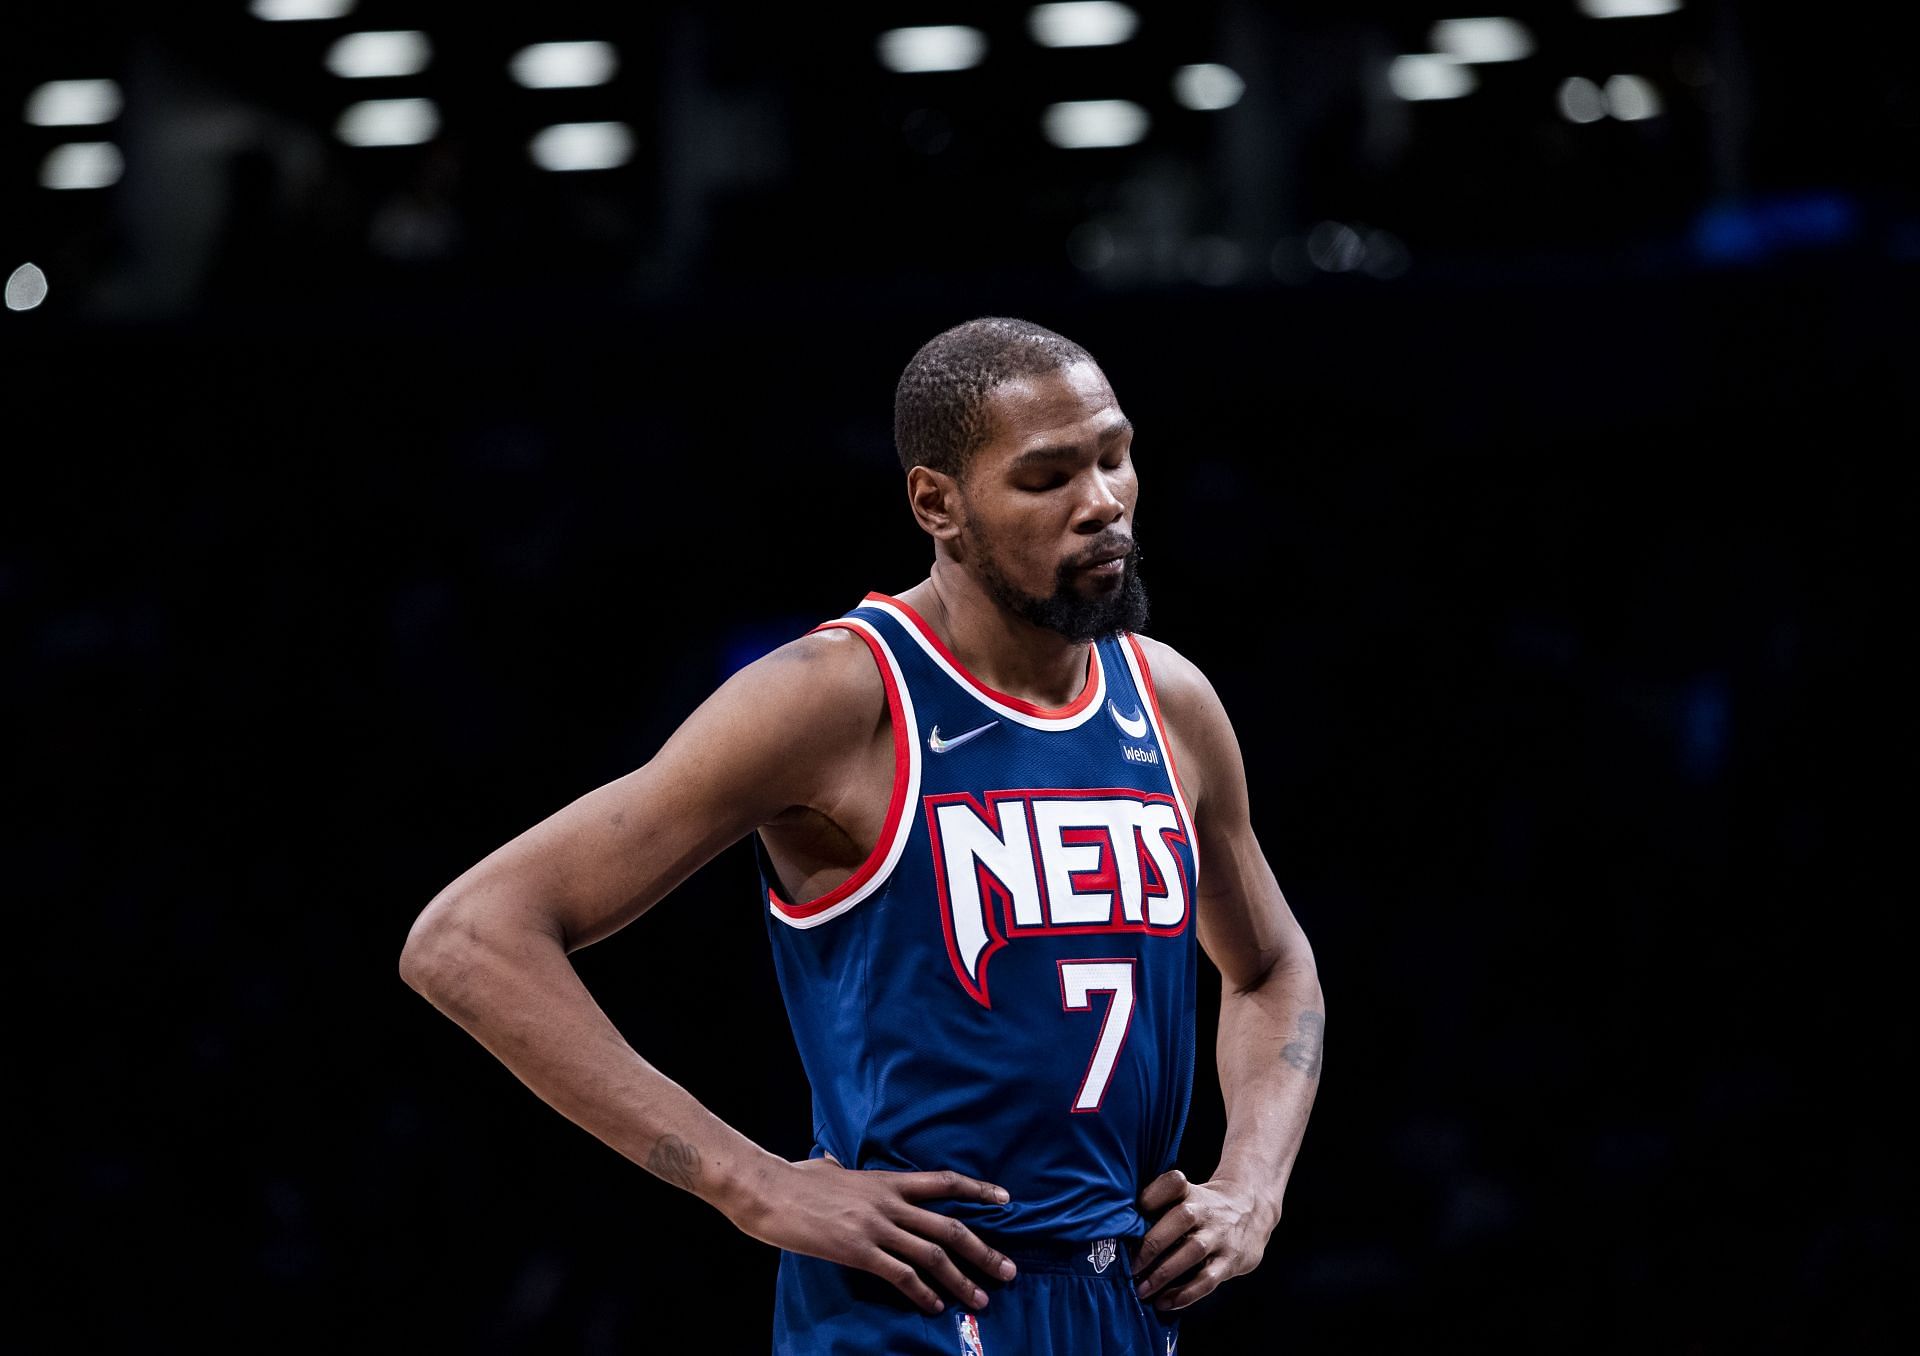 Kevin Durant #7 of the Brooklyn Nets reacts during game against the Miami Heat at Barclays Center on March 3, 2022 in the Brooklyn borough of New York City